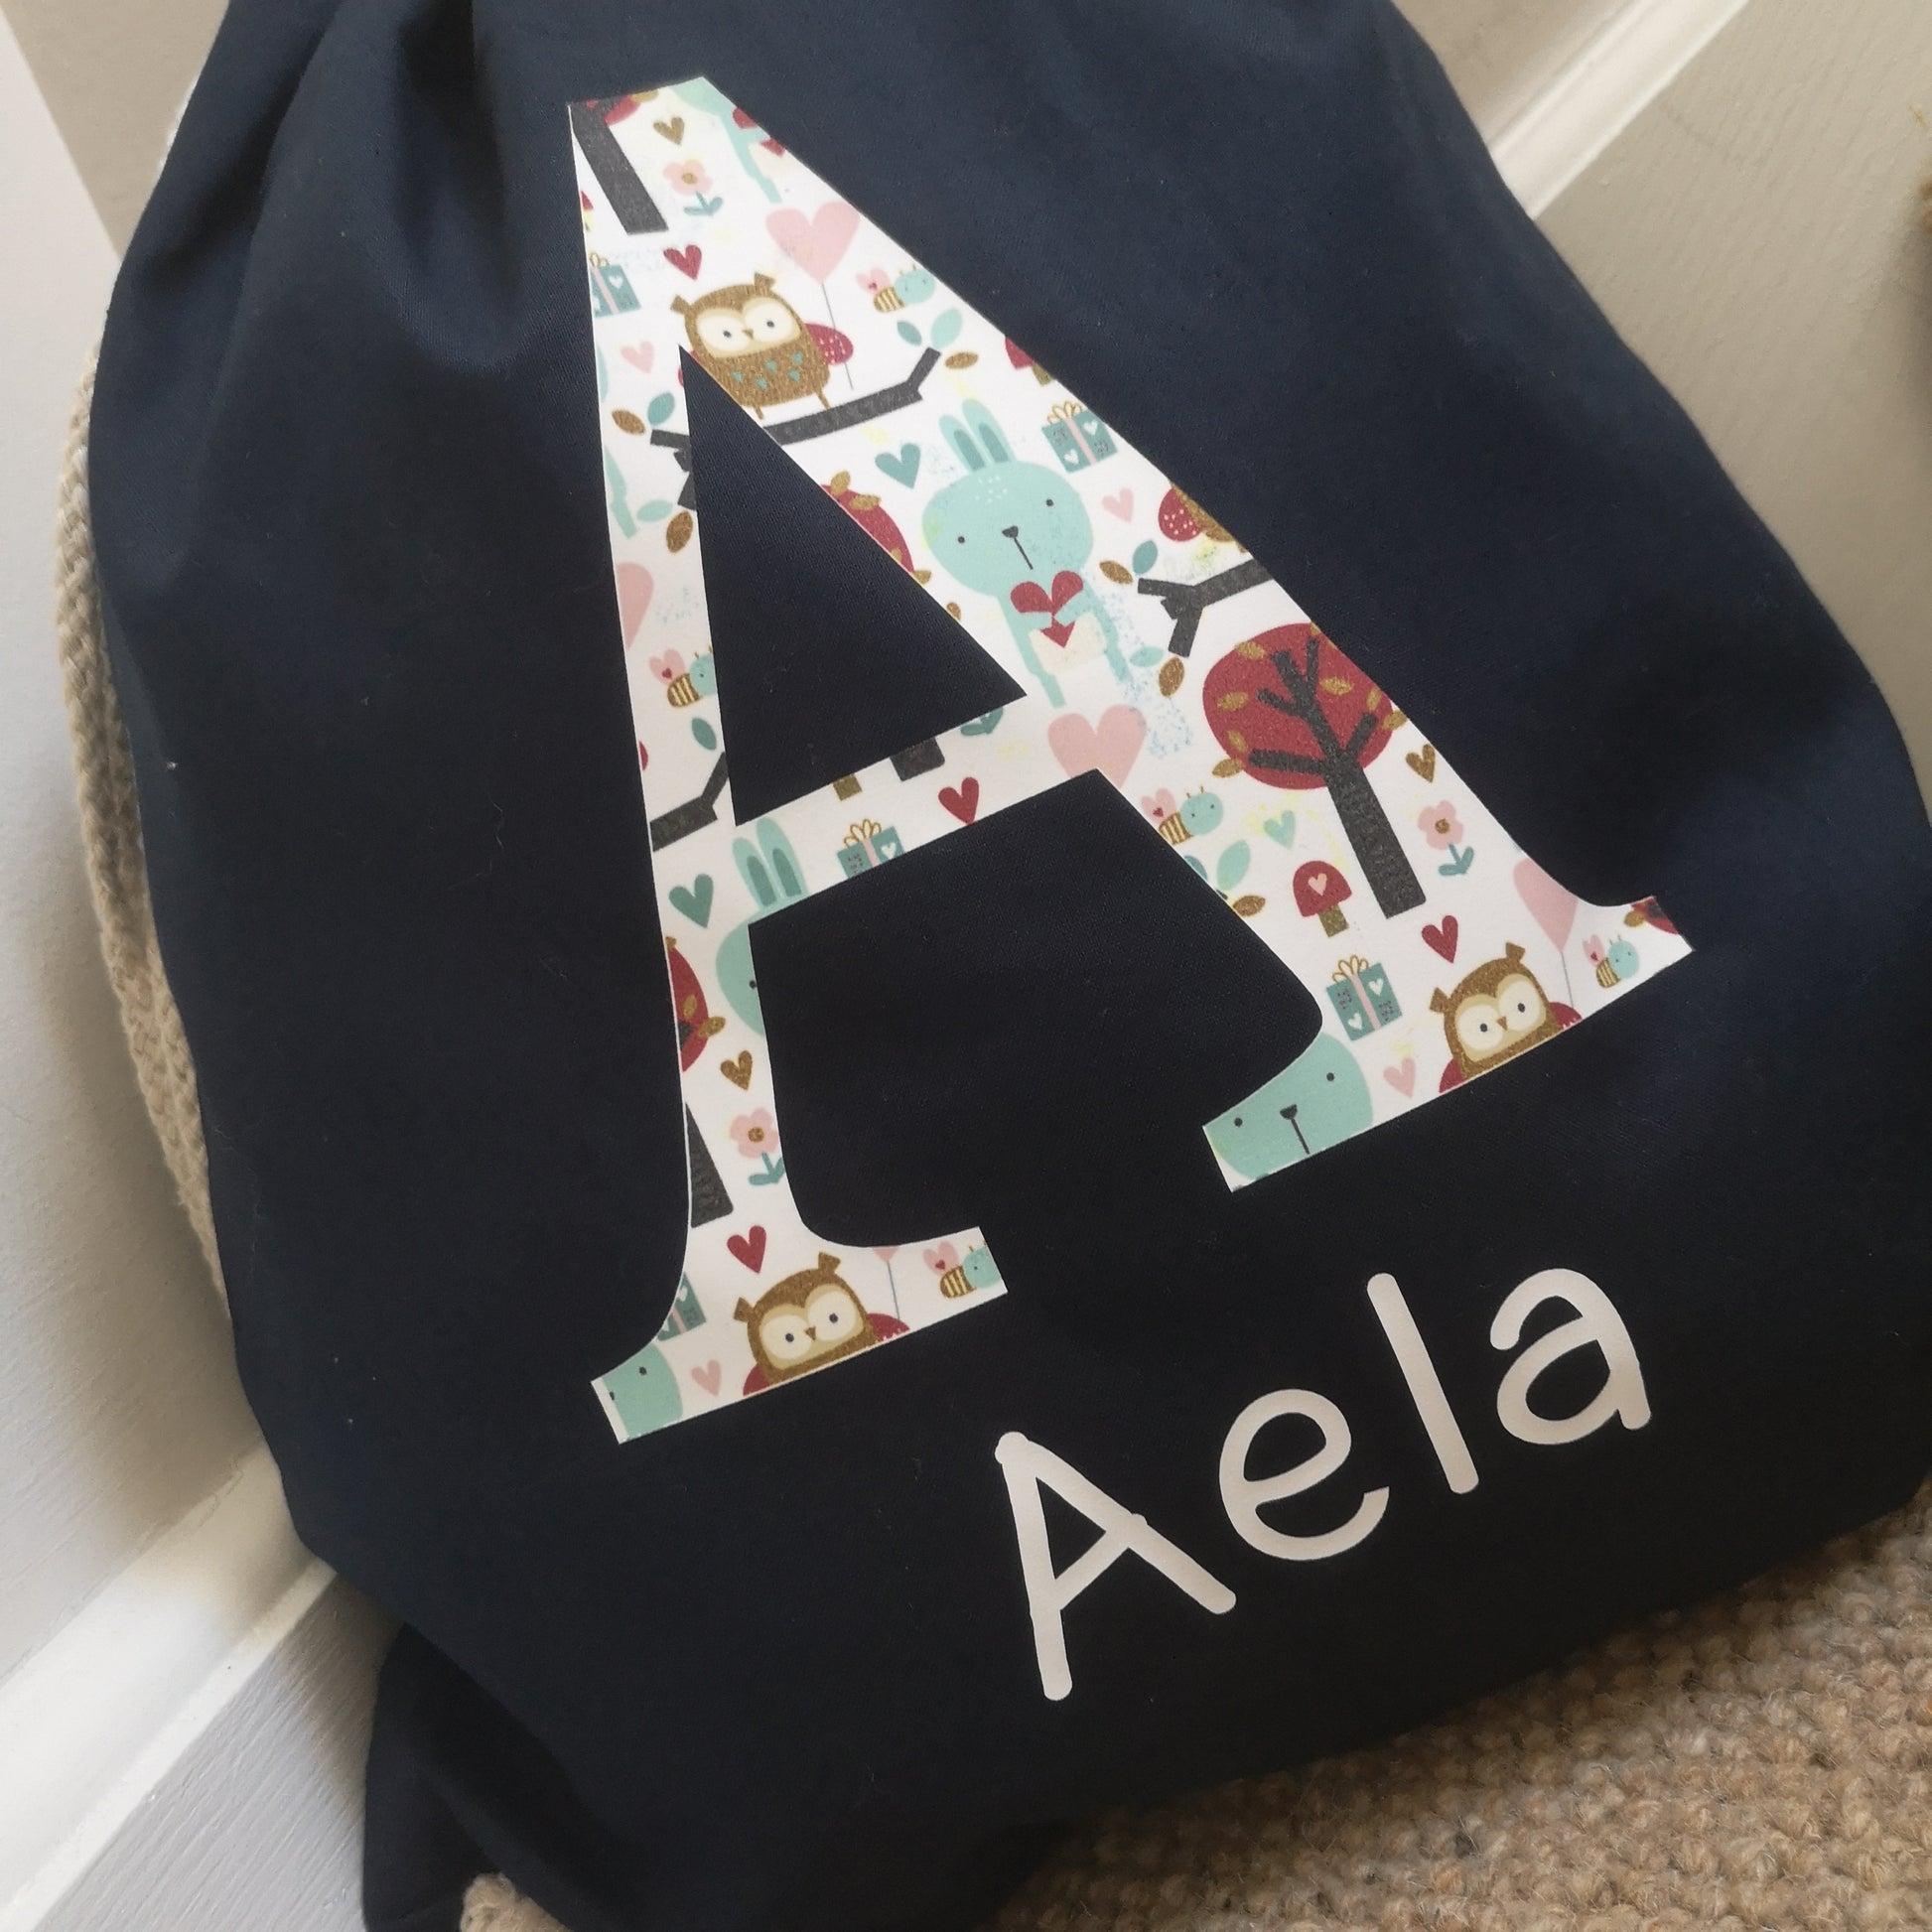 A close up of a royal navy personalised light drawstring bag with a patterned Initial and their name underneath